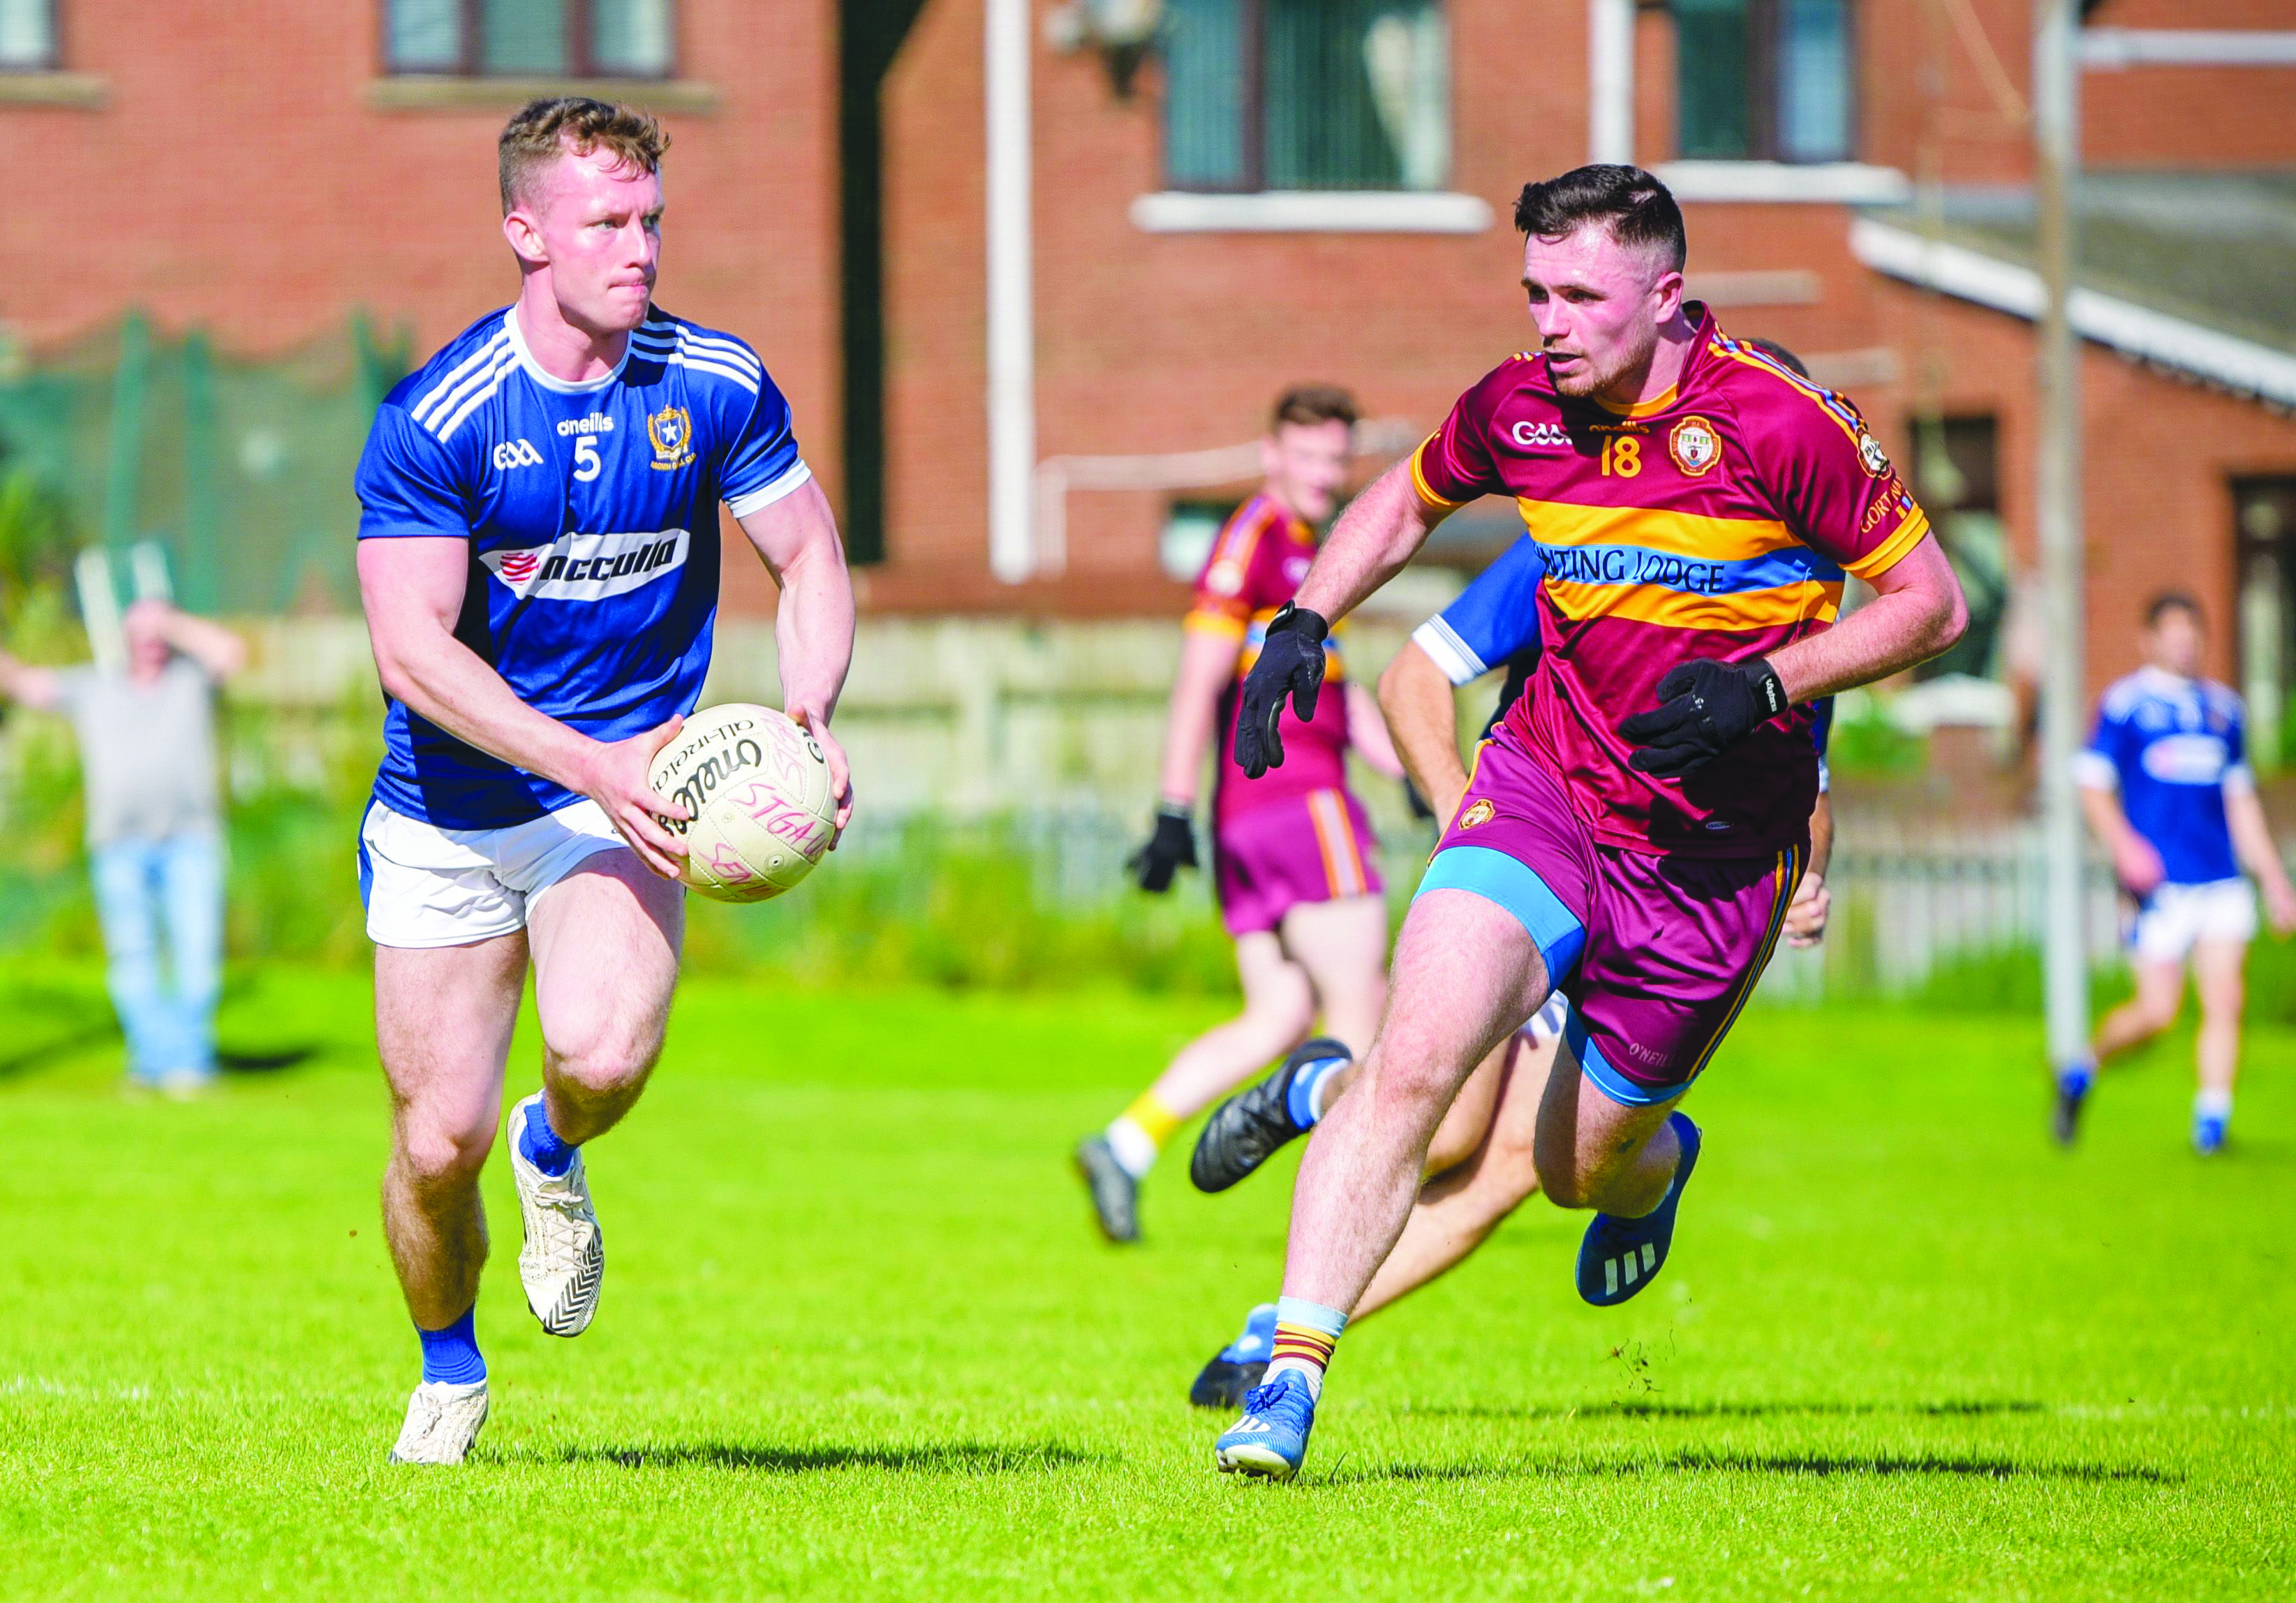 John McCaffrey is one of a number of younger players who have graduated onto the St Gall’s team in recent years